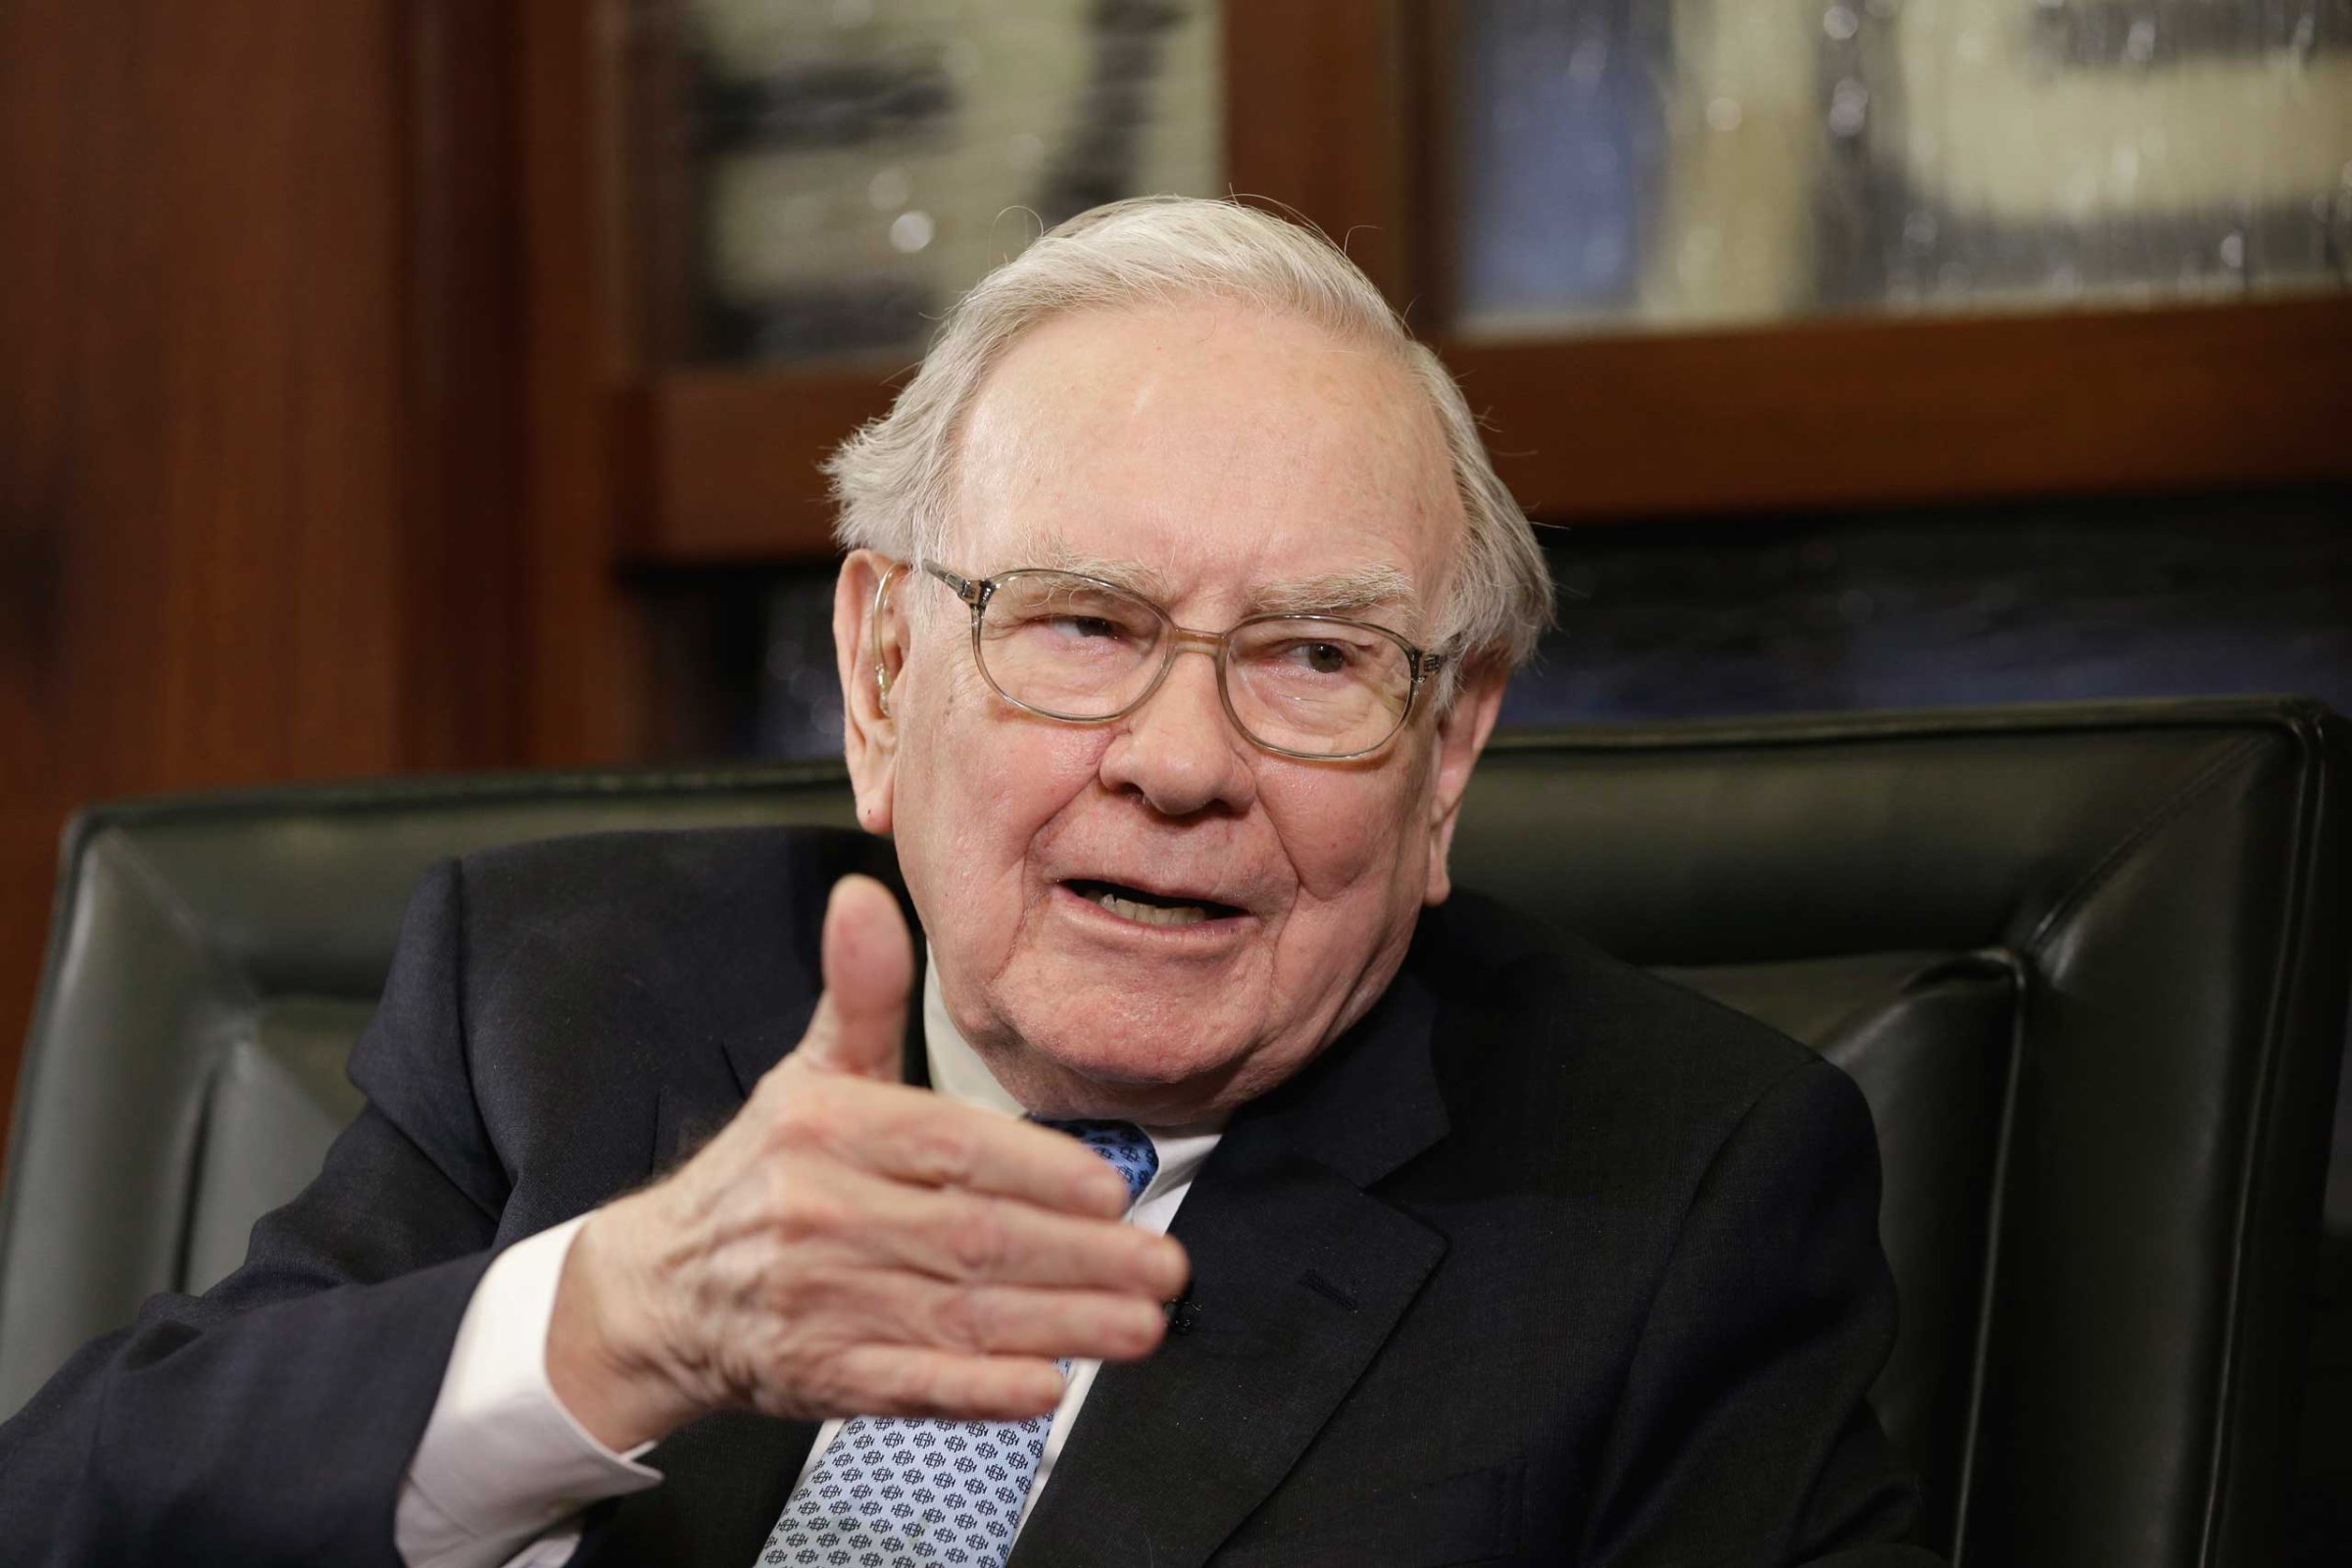 Berkshire Hathaway Chairman and CEO Warren Buffett during an interview in Omaha, Neb. May 2014.